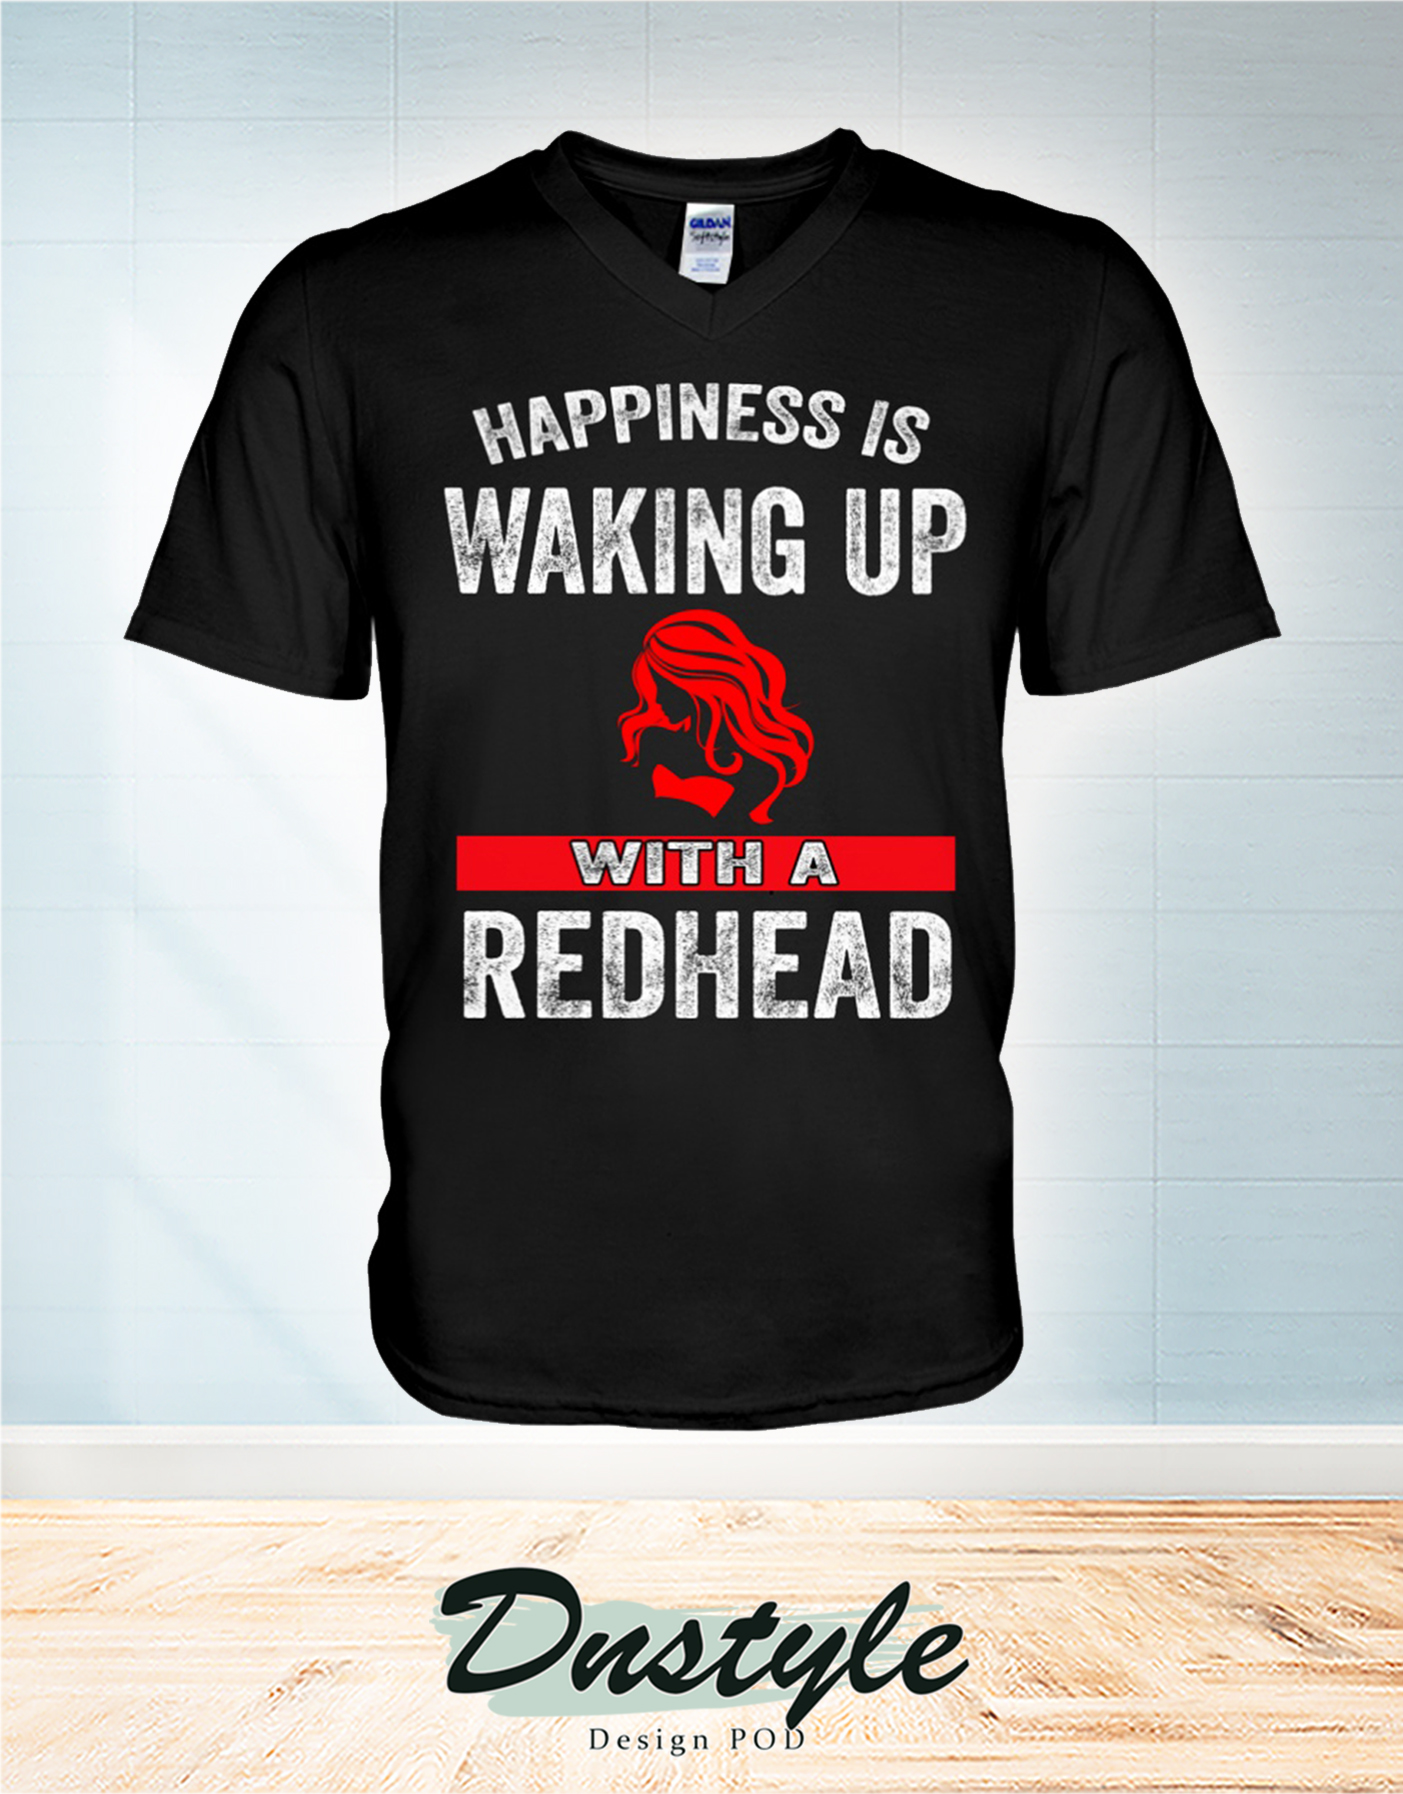 Happiness is waking up with a redhead v-neck